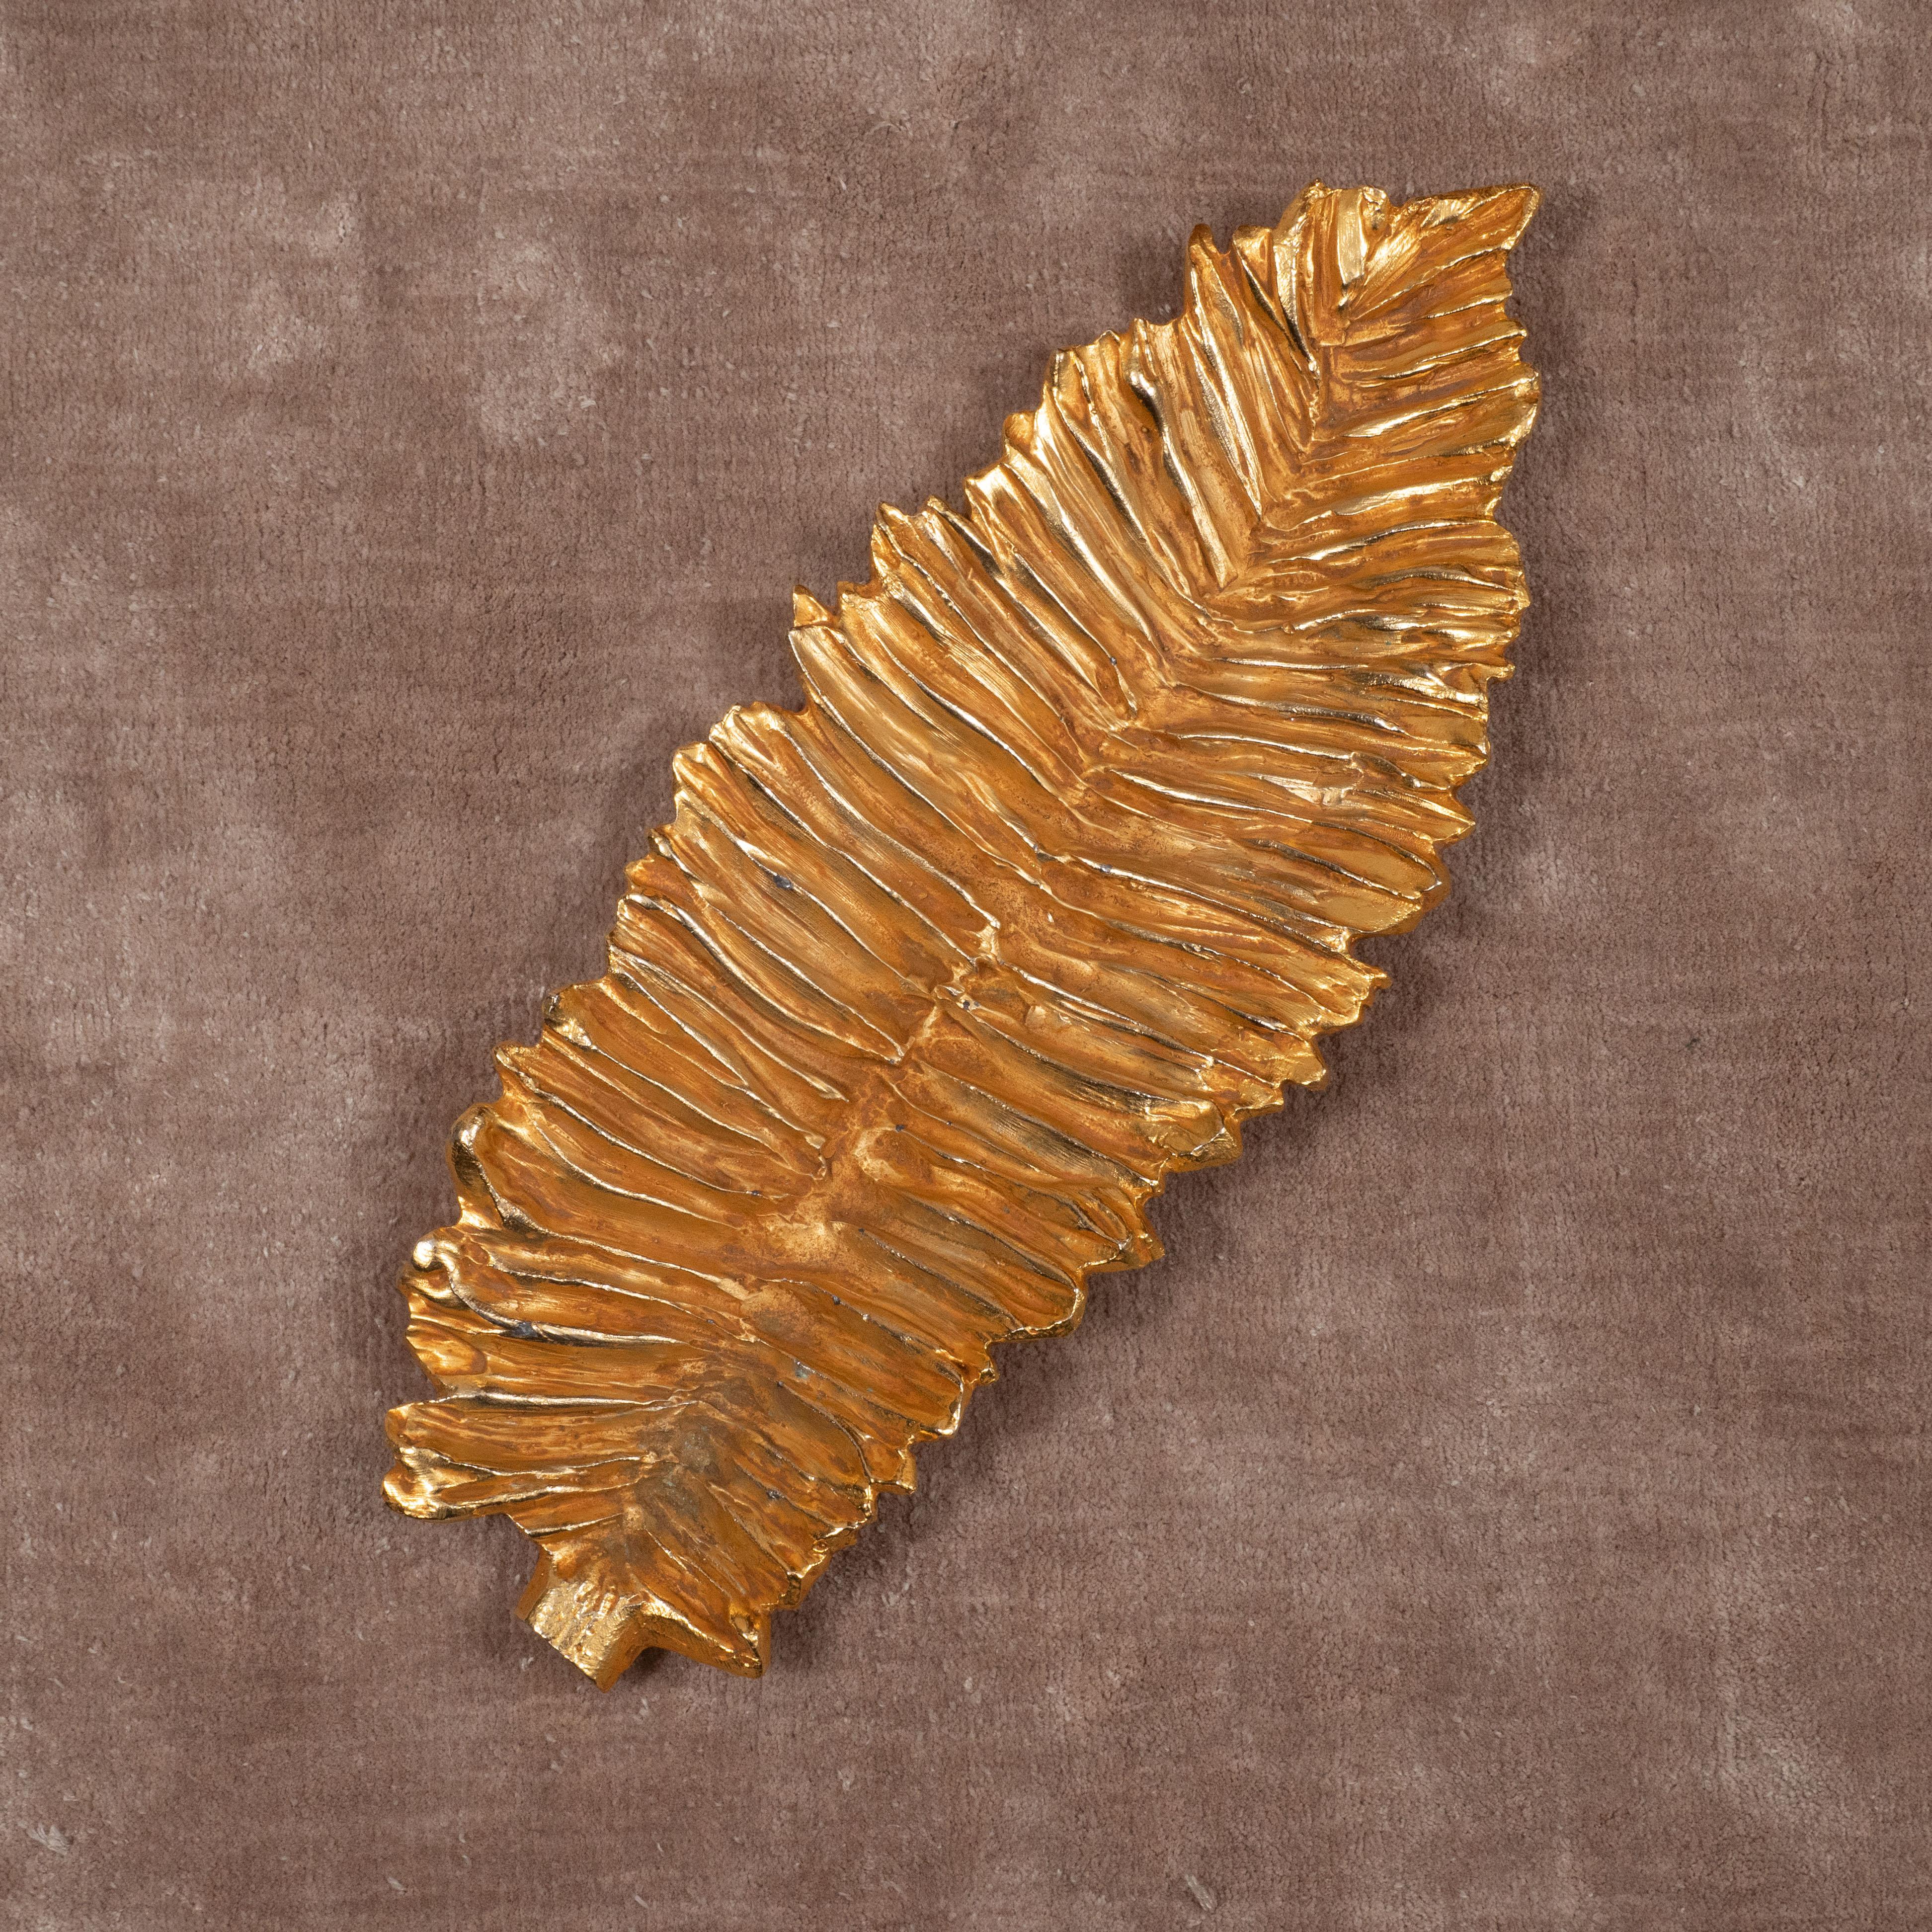 A dramatic, gilt metal decorative dish or low bowl by Stephane Galerneau in the shape of a long leaf. France, circa 1980.

Two available; priced individually. 

Measures 18